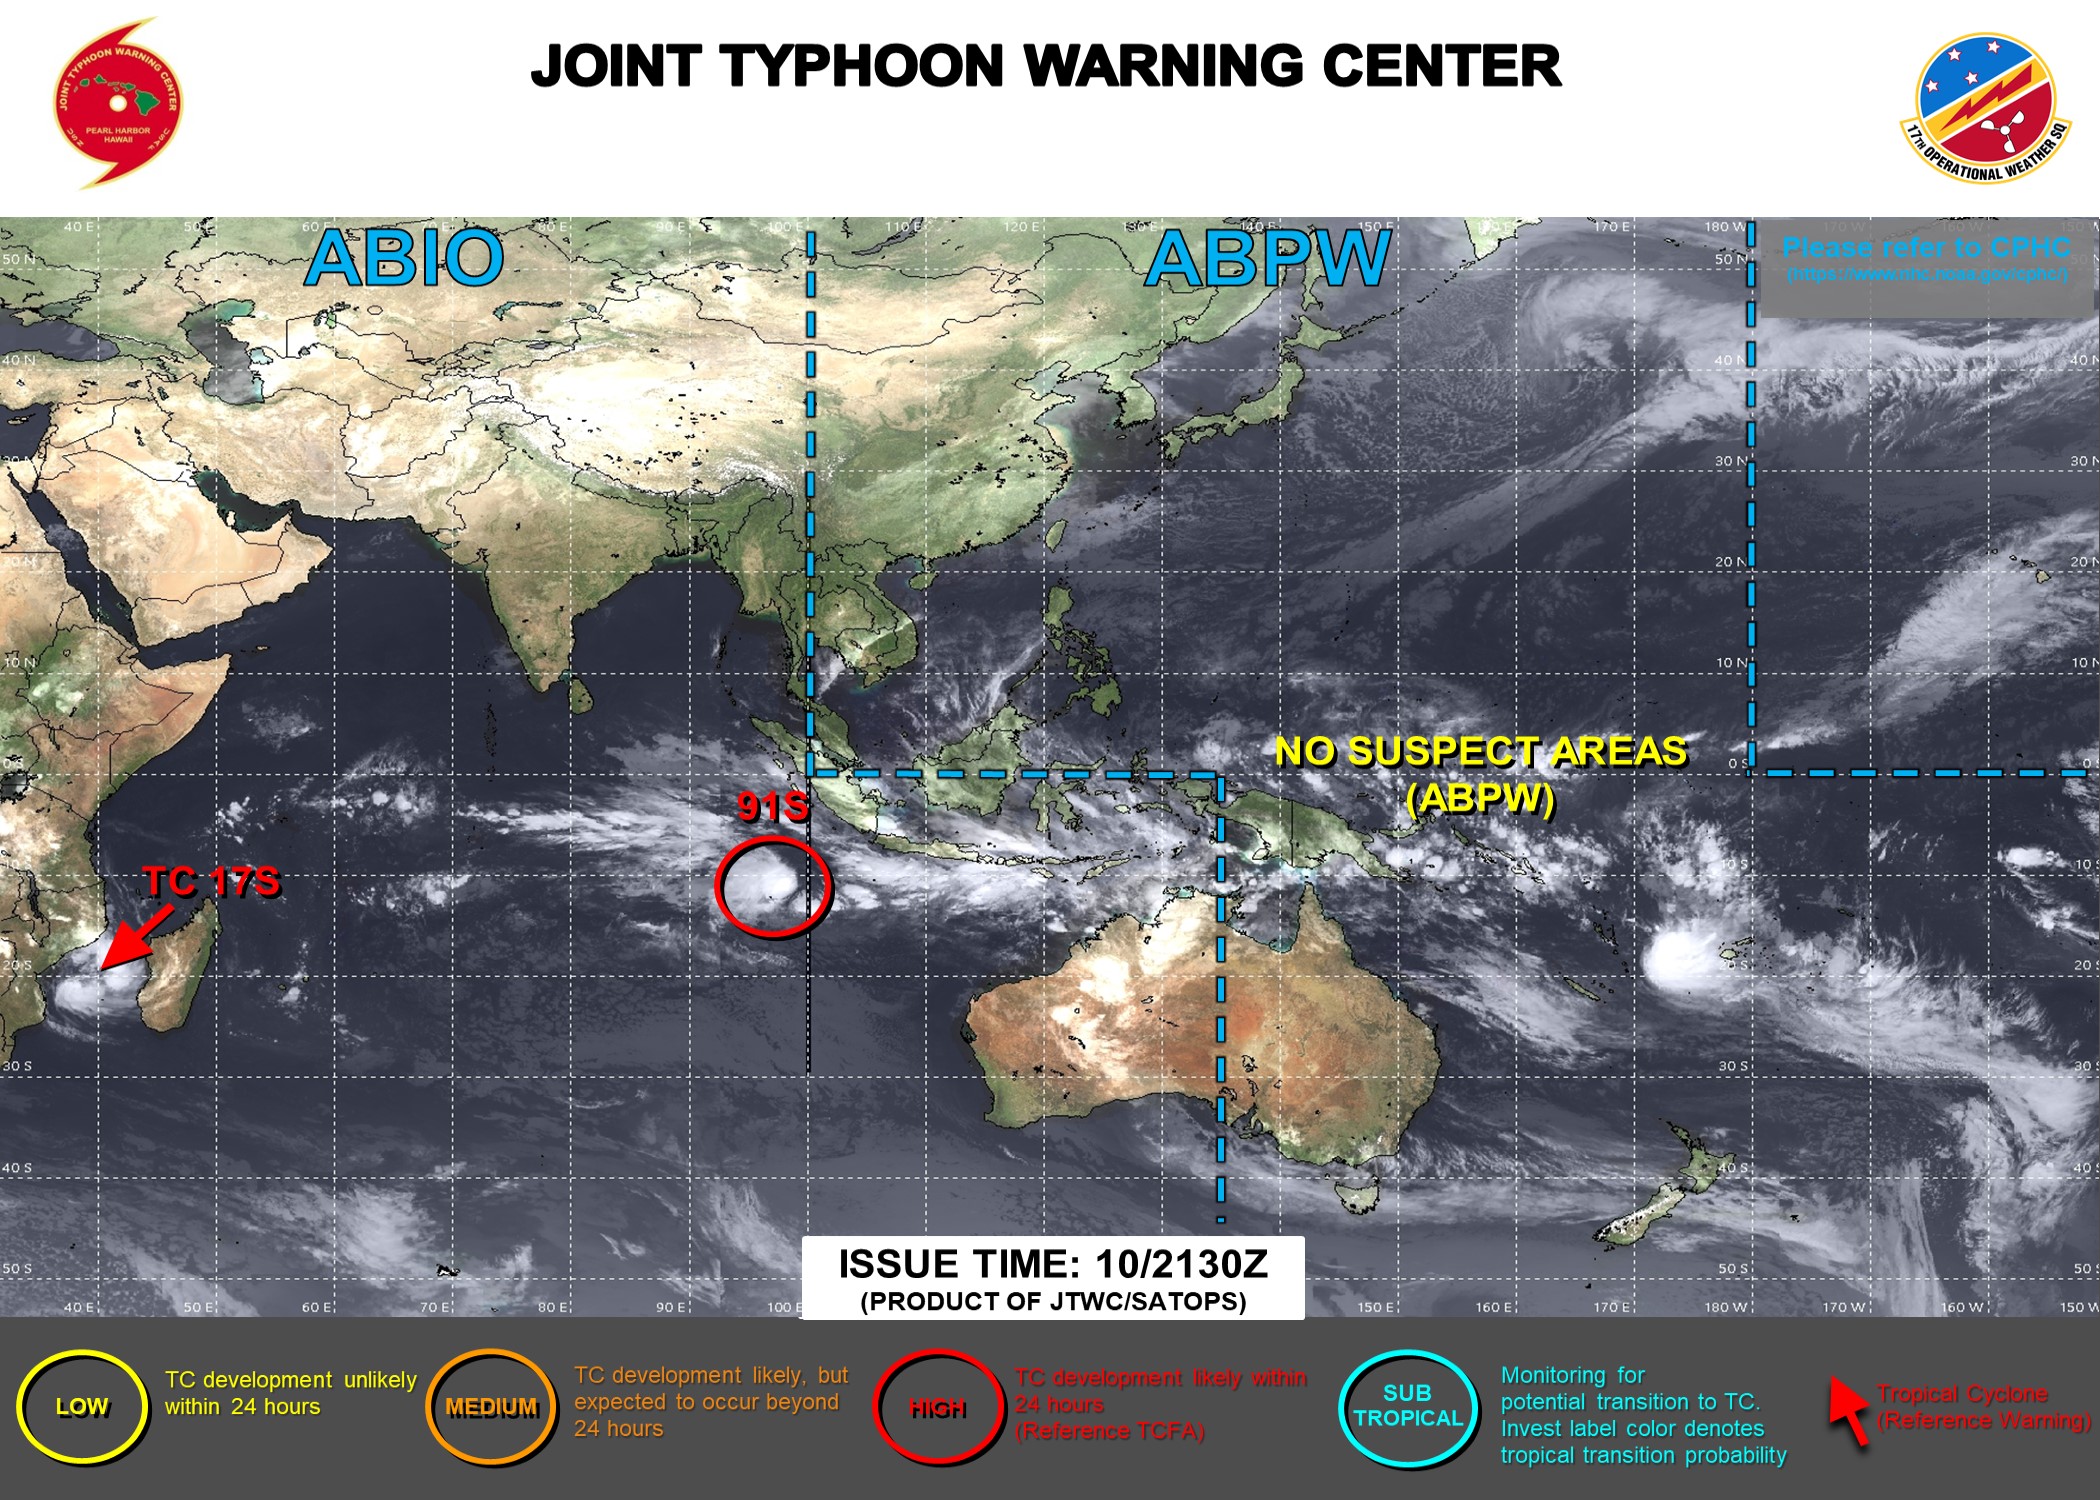 JTWC IS ISSUING 12HOURLY WARNINGS AND 3HOURLY SATELLITE BULLETINS ON TC 17S AND 3HOURLY SATELLITE BULLETINS ON INVEST 91S